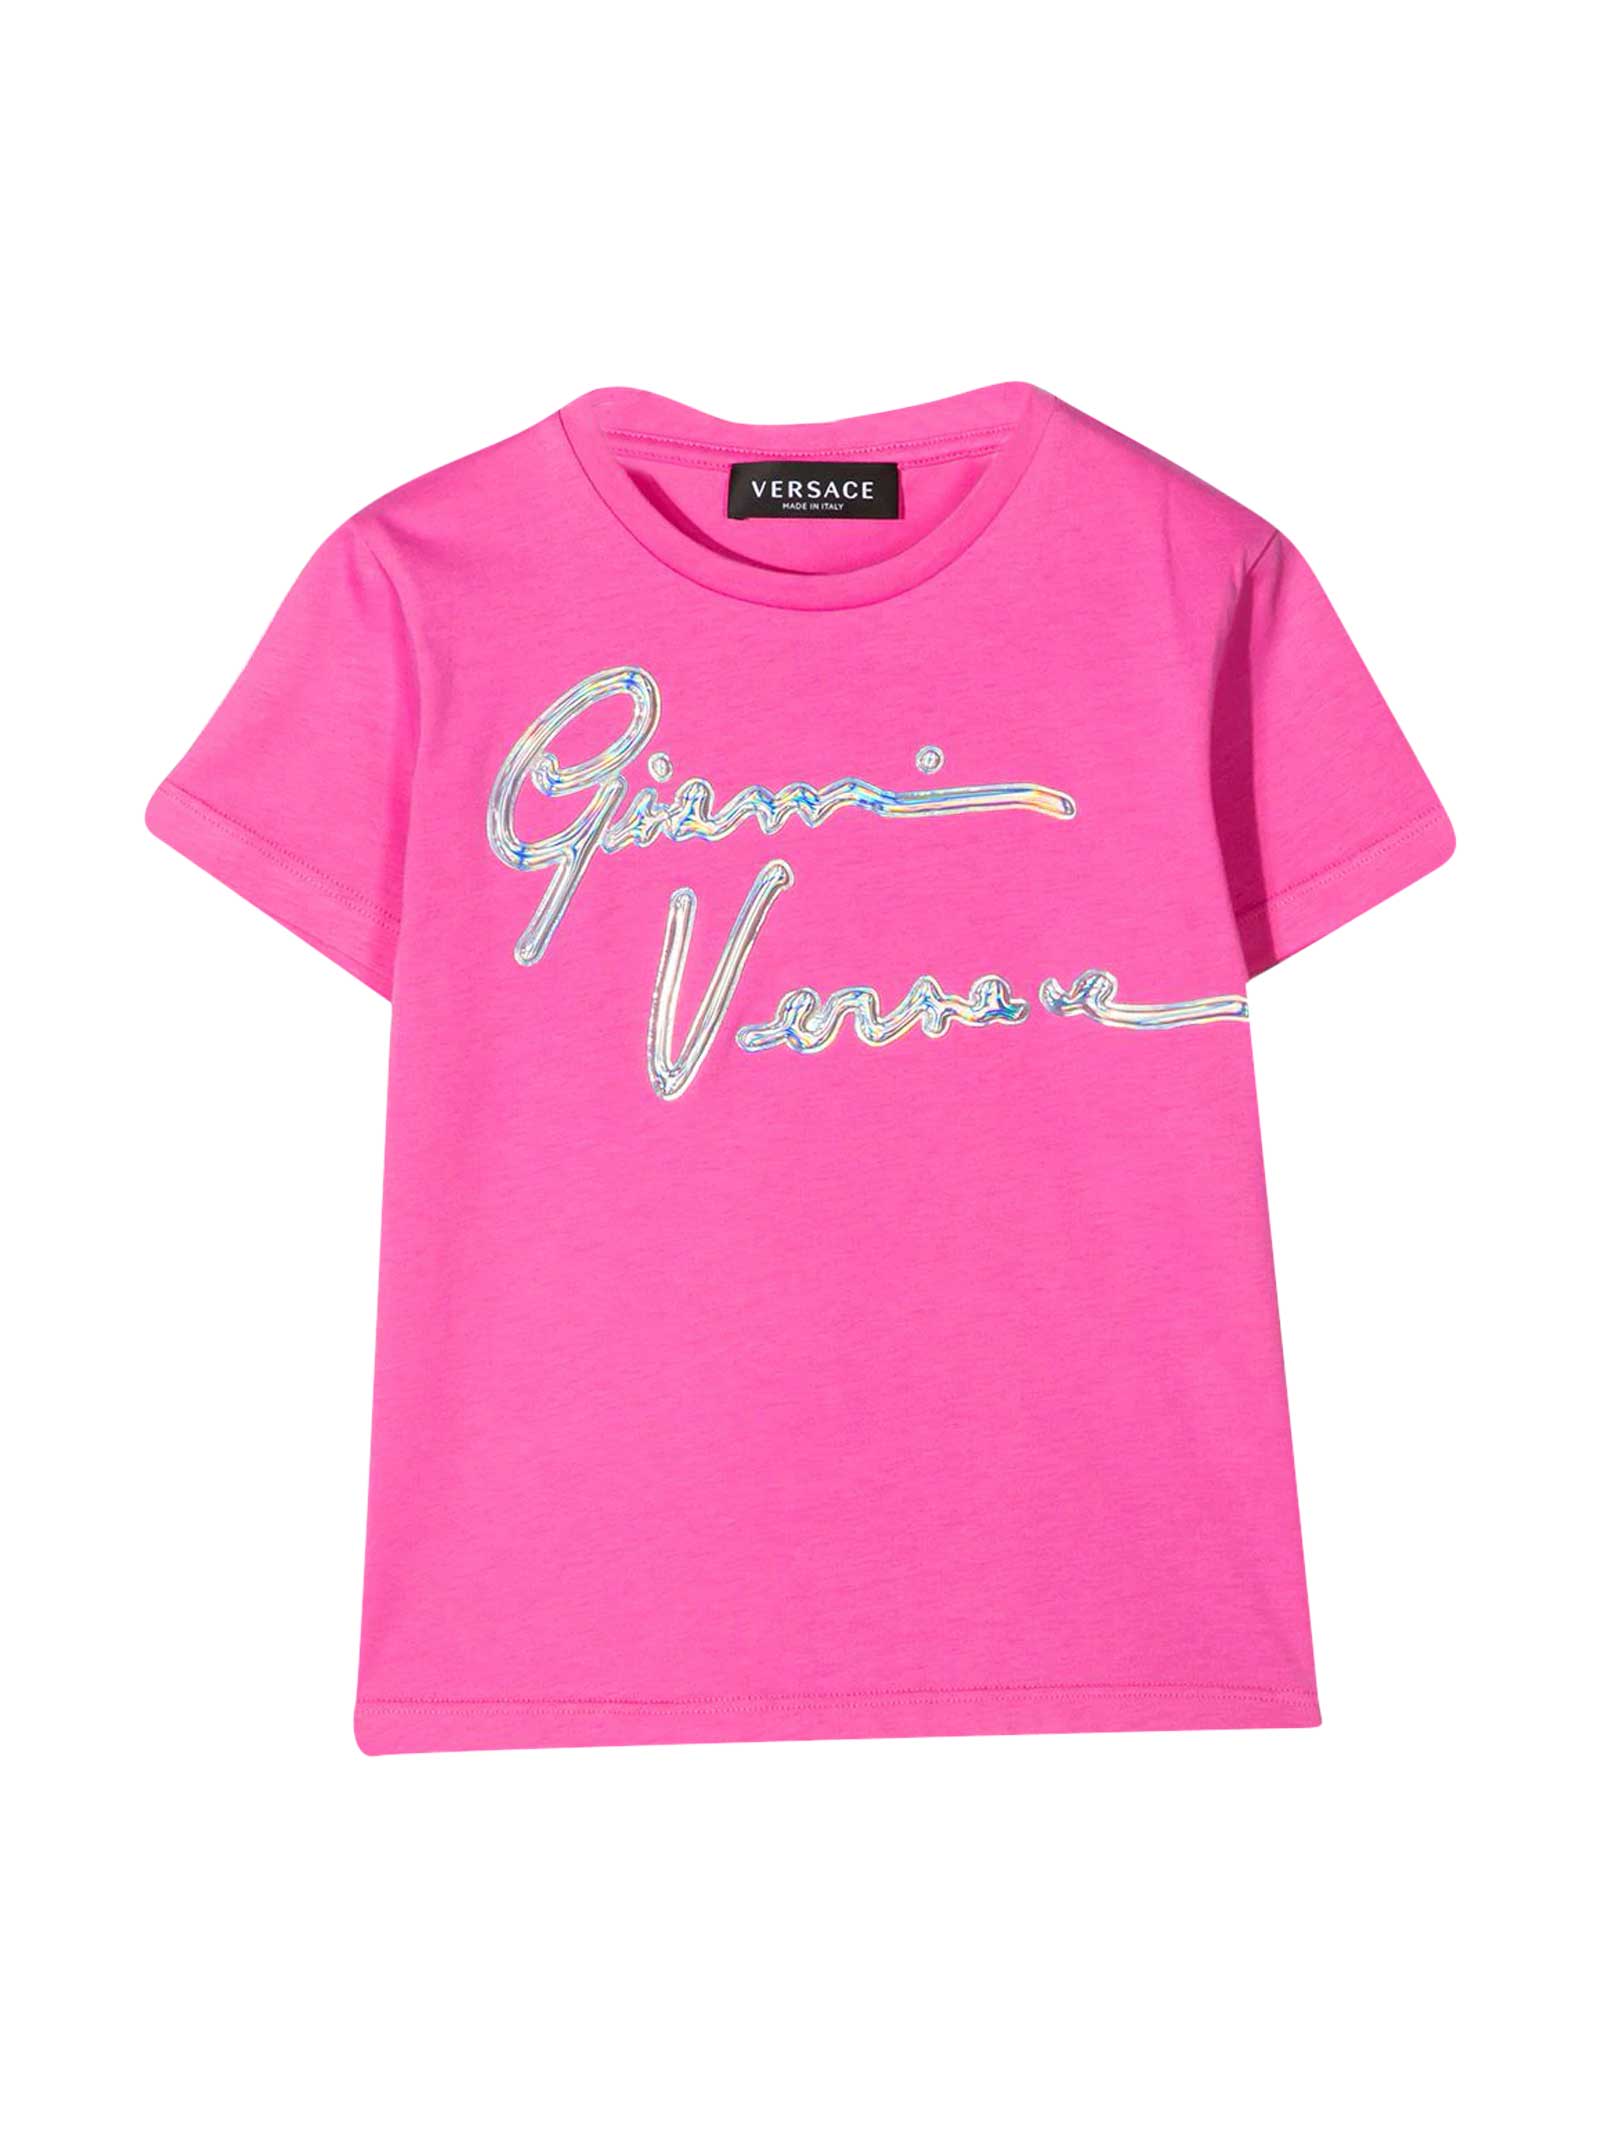 Versace Pink T-shirt Young